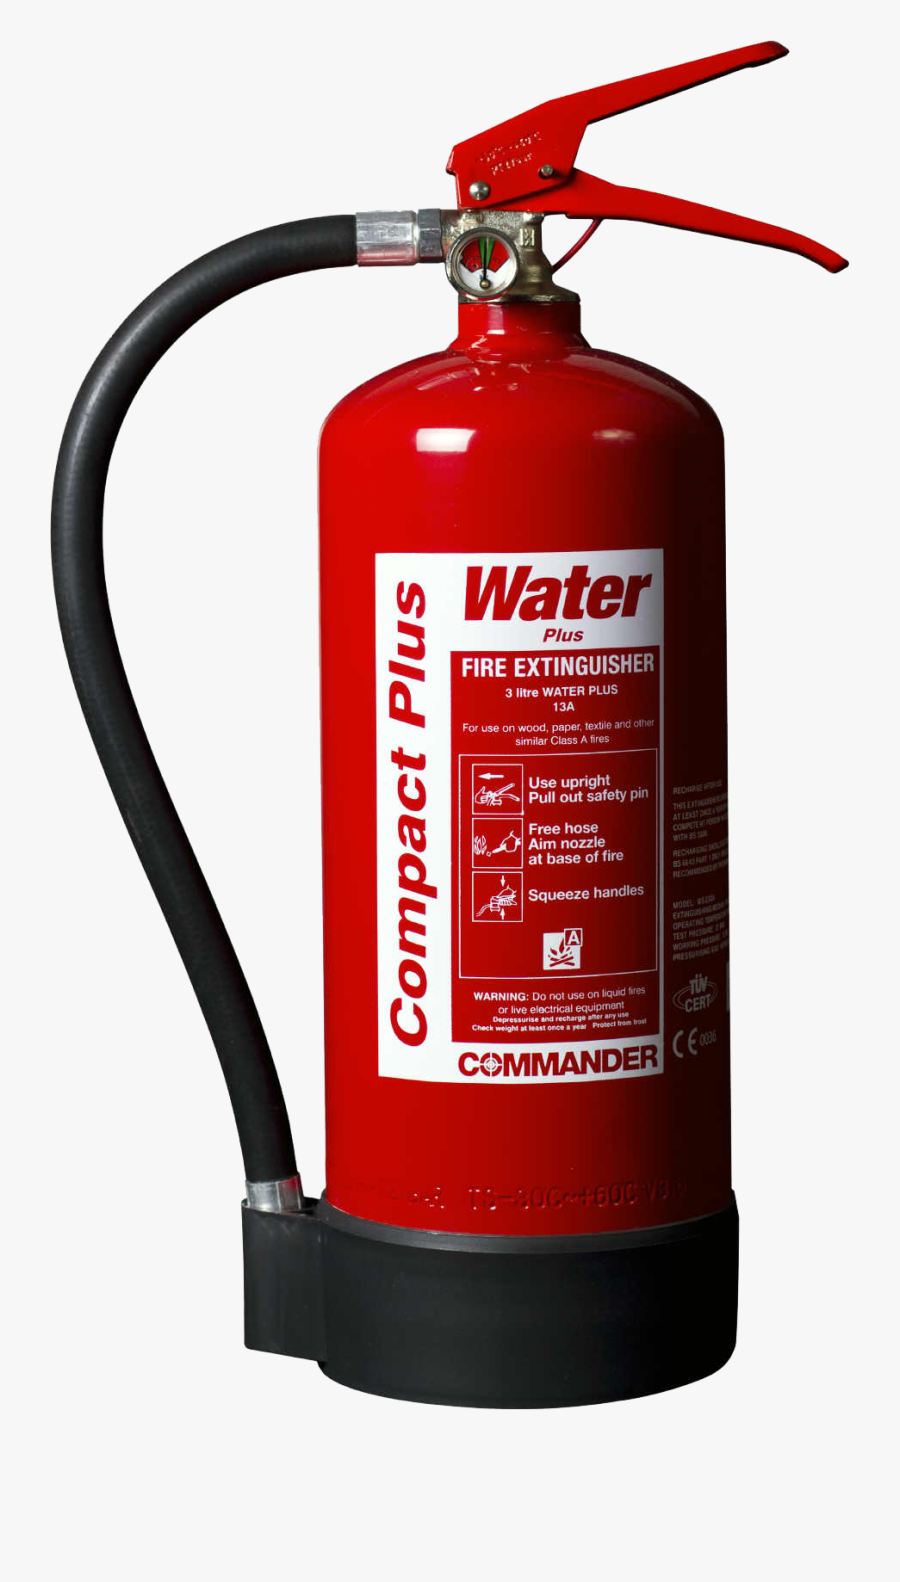 Water Fire Extinguisher Png, Transparent Clipart